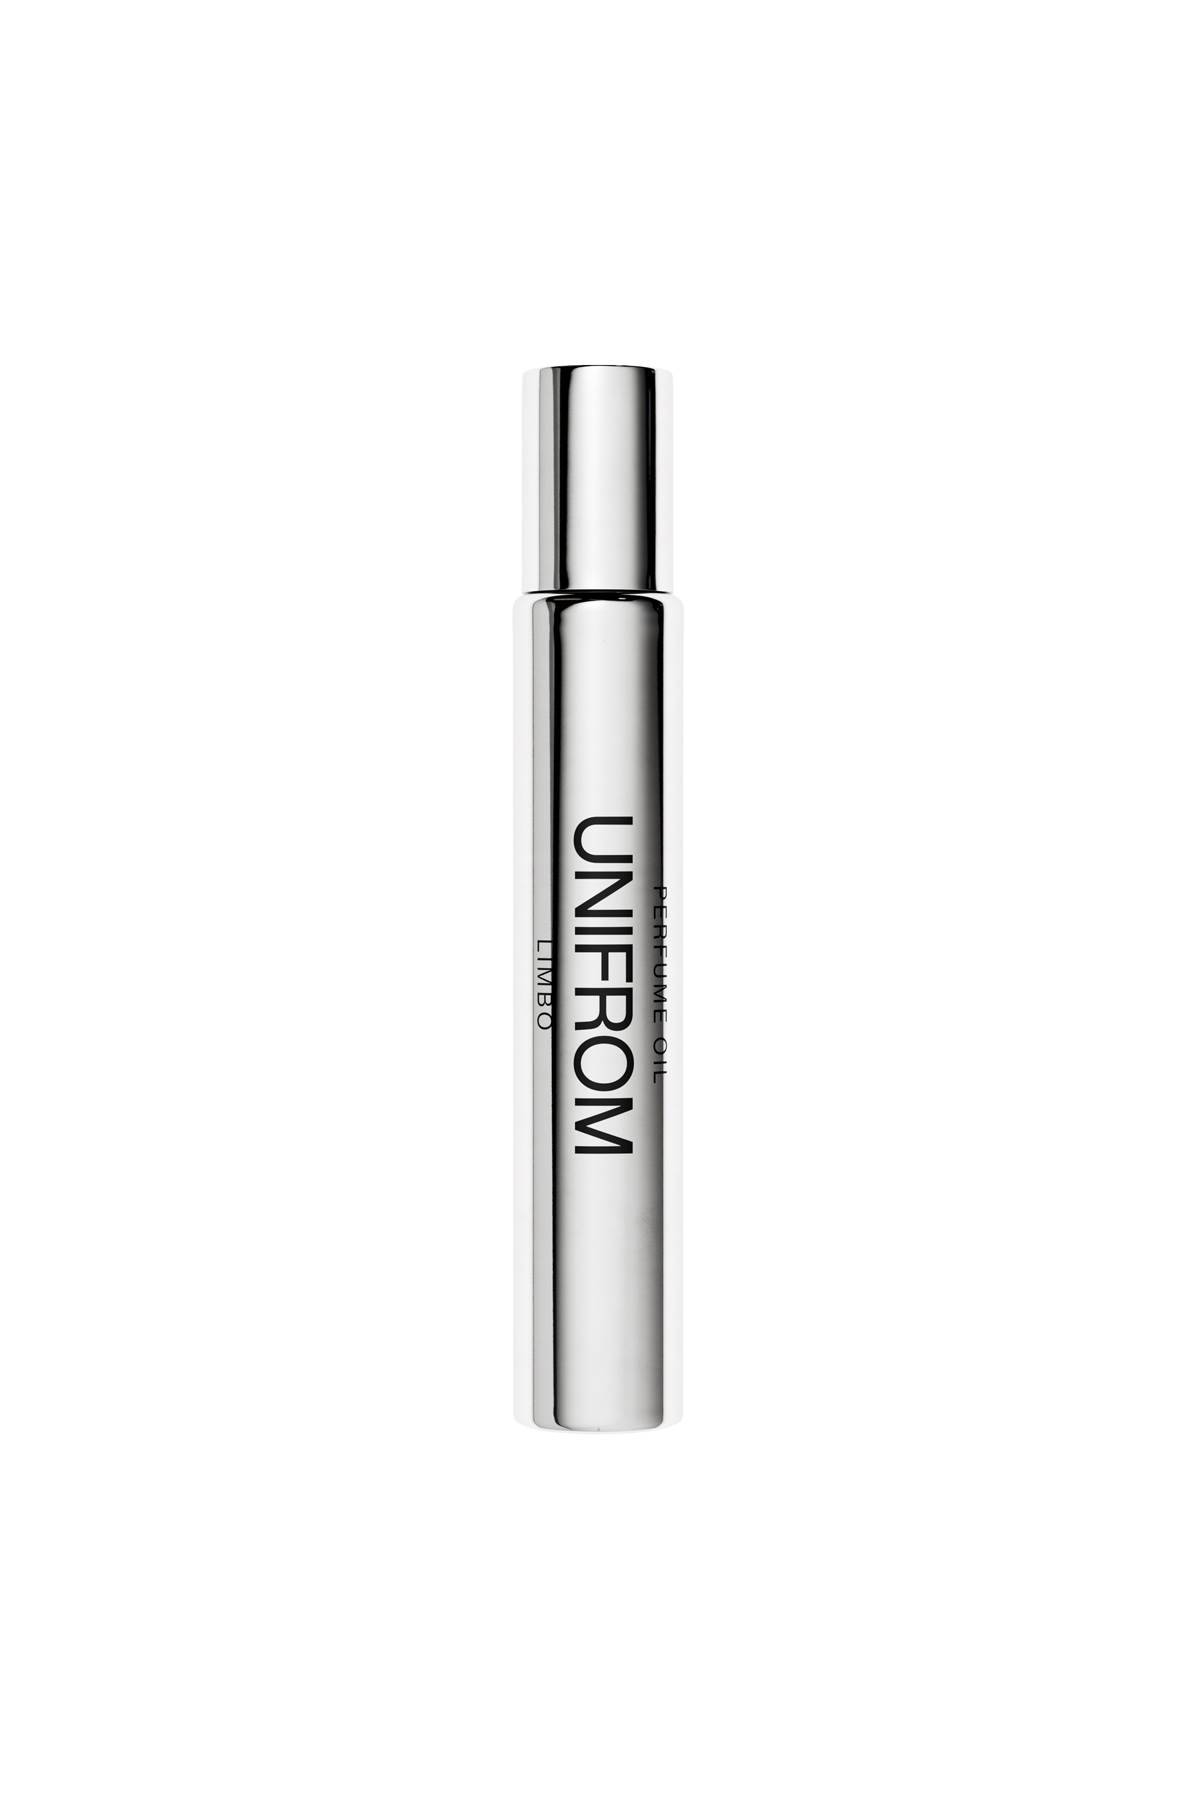 UNIFROM UNIFROM perfume oil limbo - 10ml